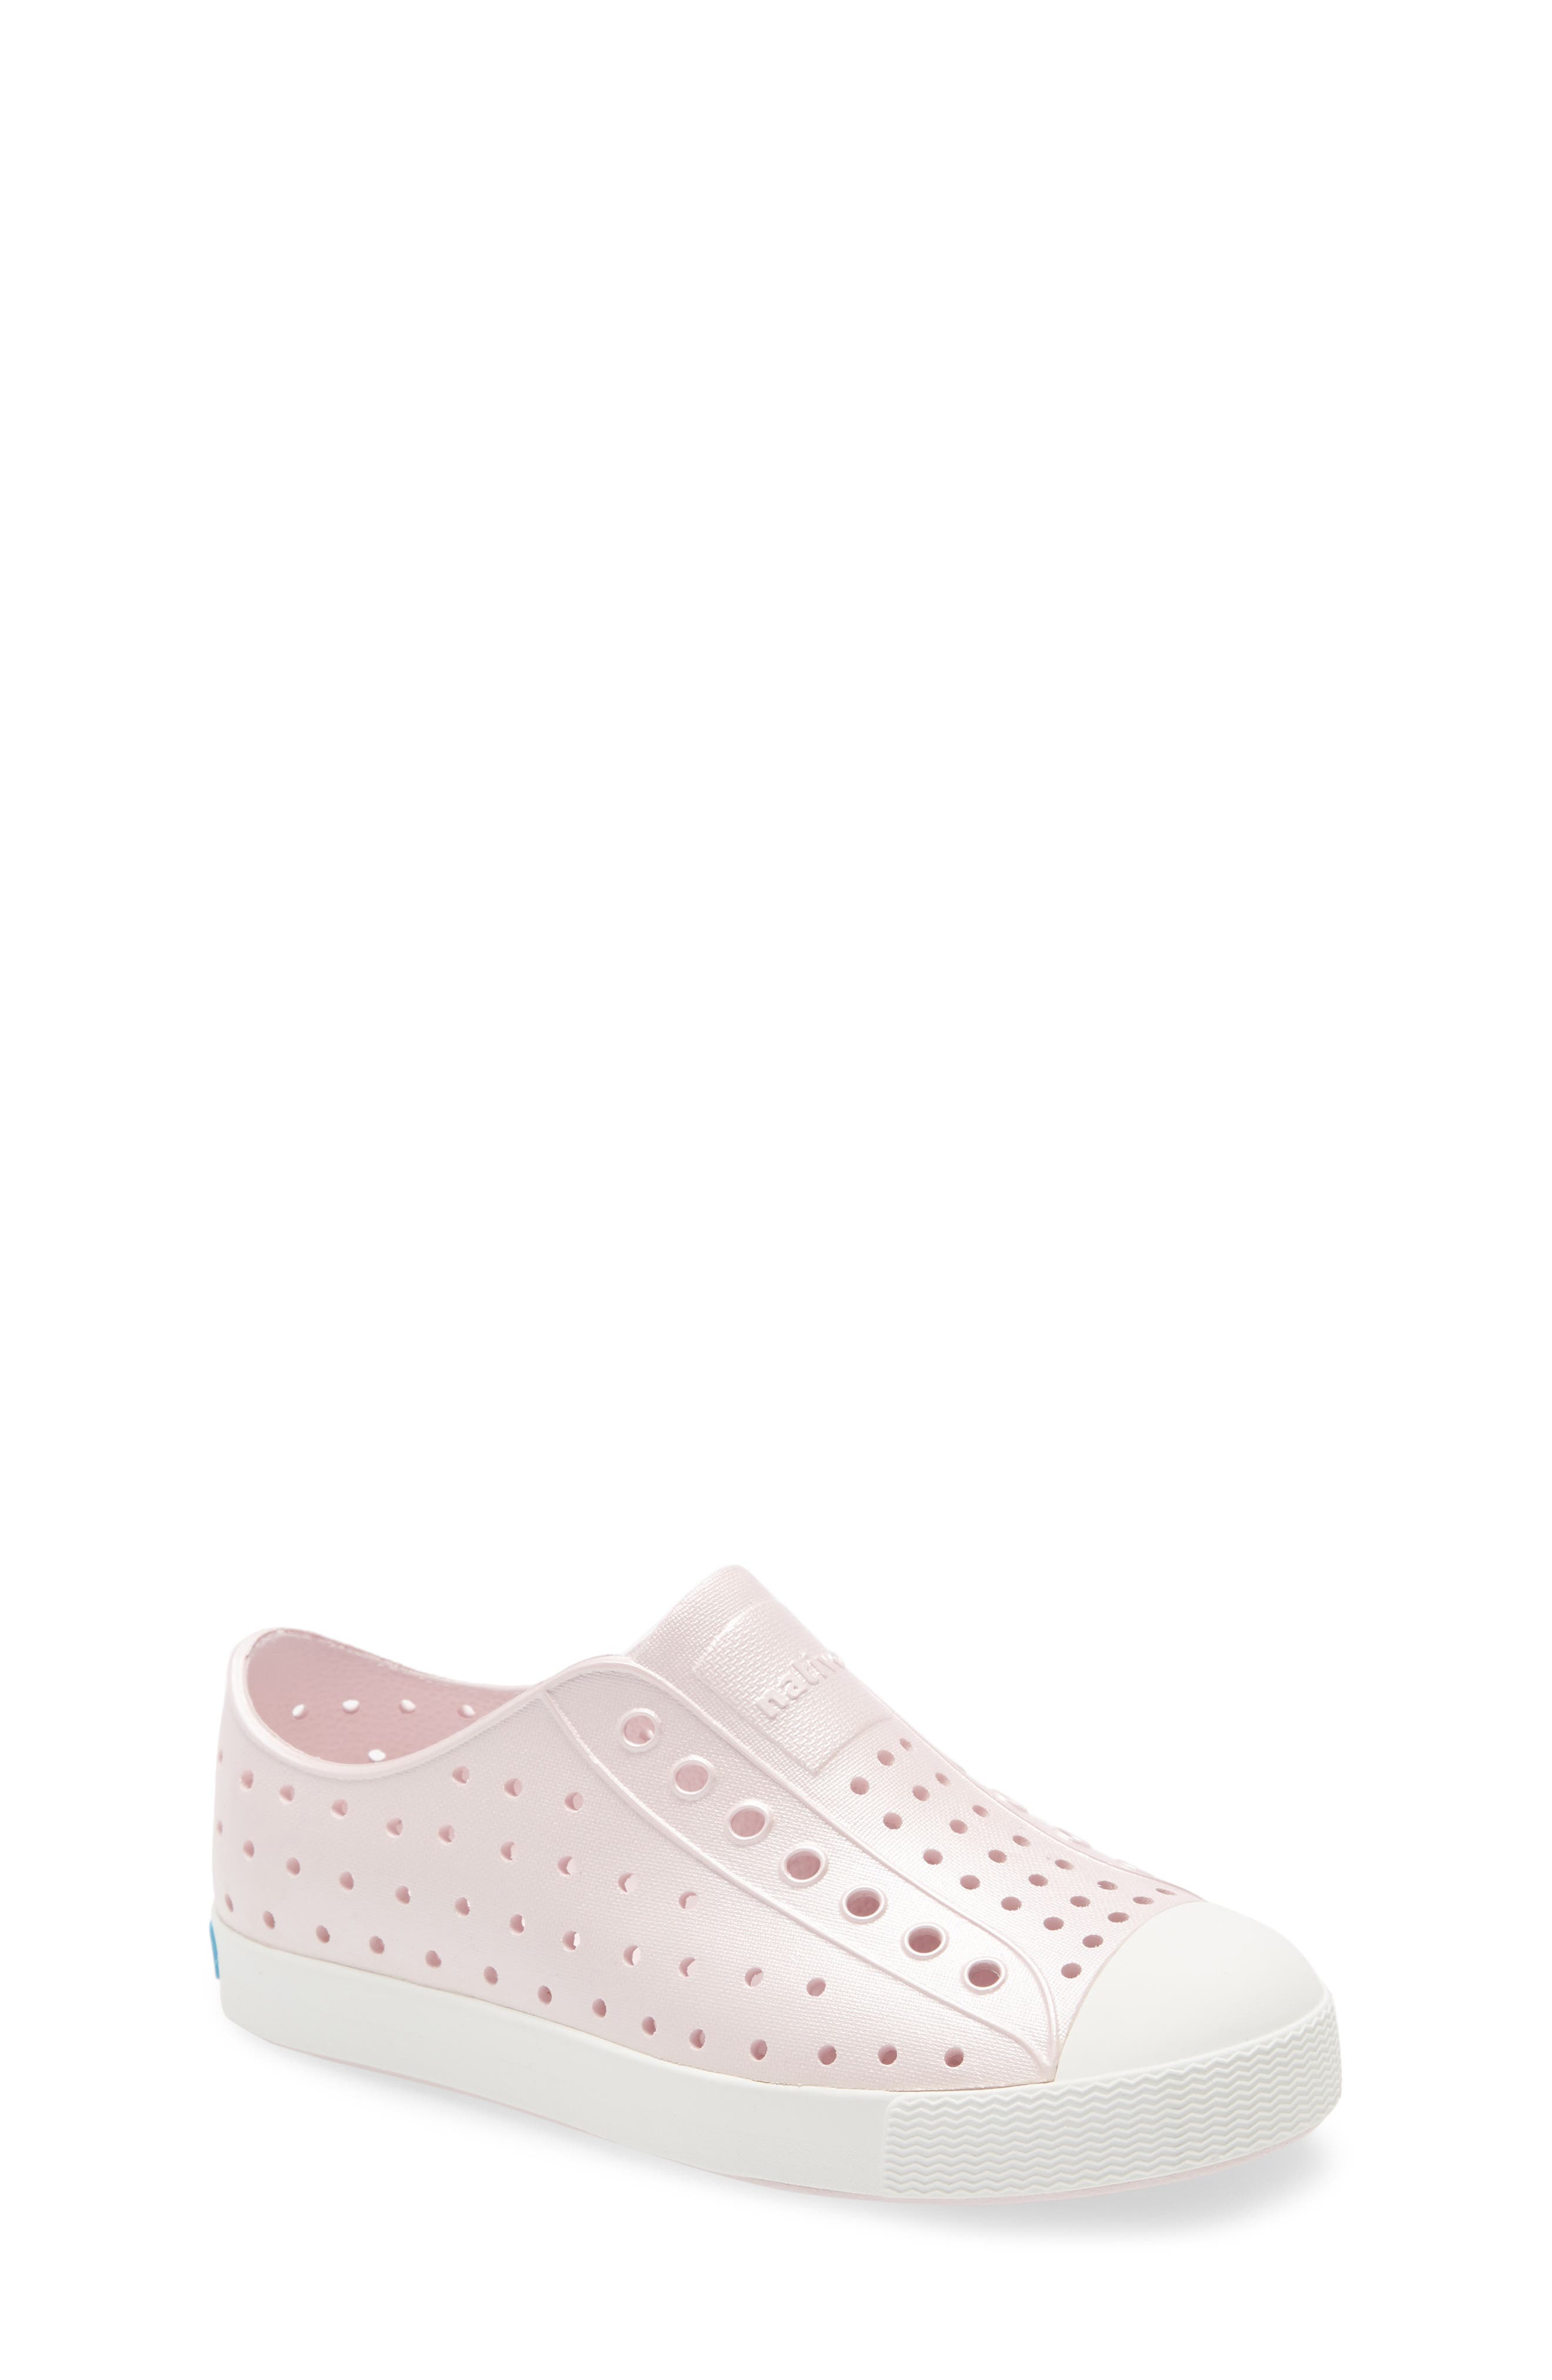 Kids' Native Shoes Shoes | Nordstrom